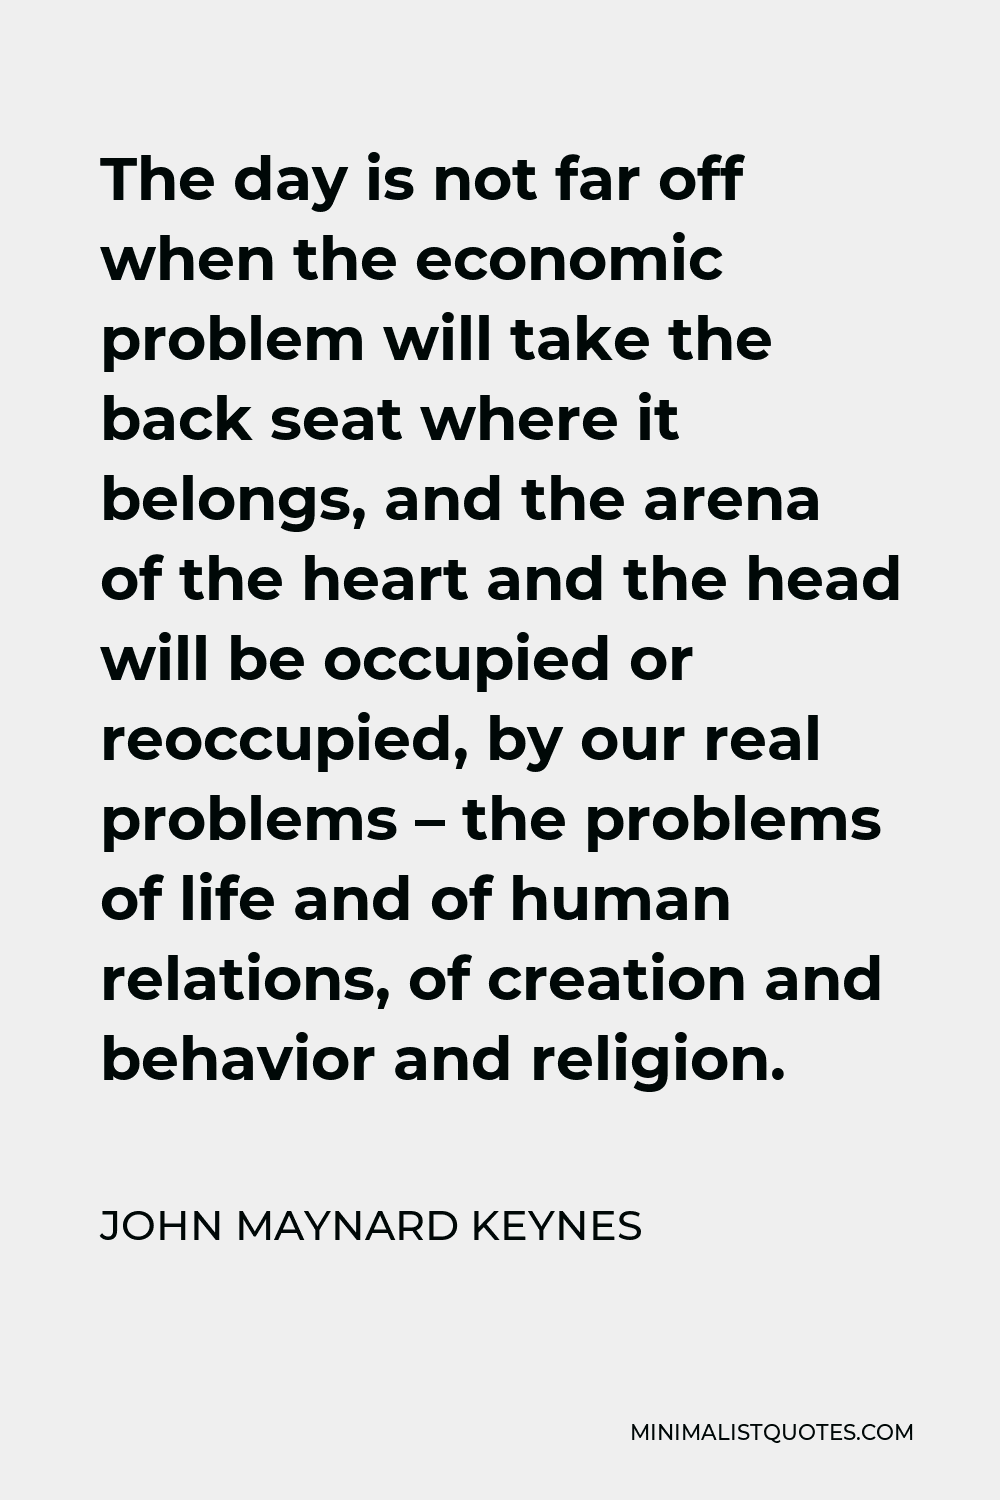 John Maynard Keynes Quote - The day is not far off when the economic problem will take the back seat where it belongs, and the arena of the heart and the head will be occupied or reoccupied, by our real problems – the problems of life and of human relations, of creation and behavior and religion.